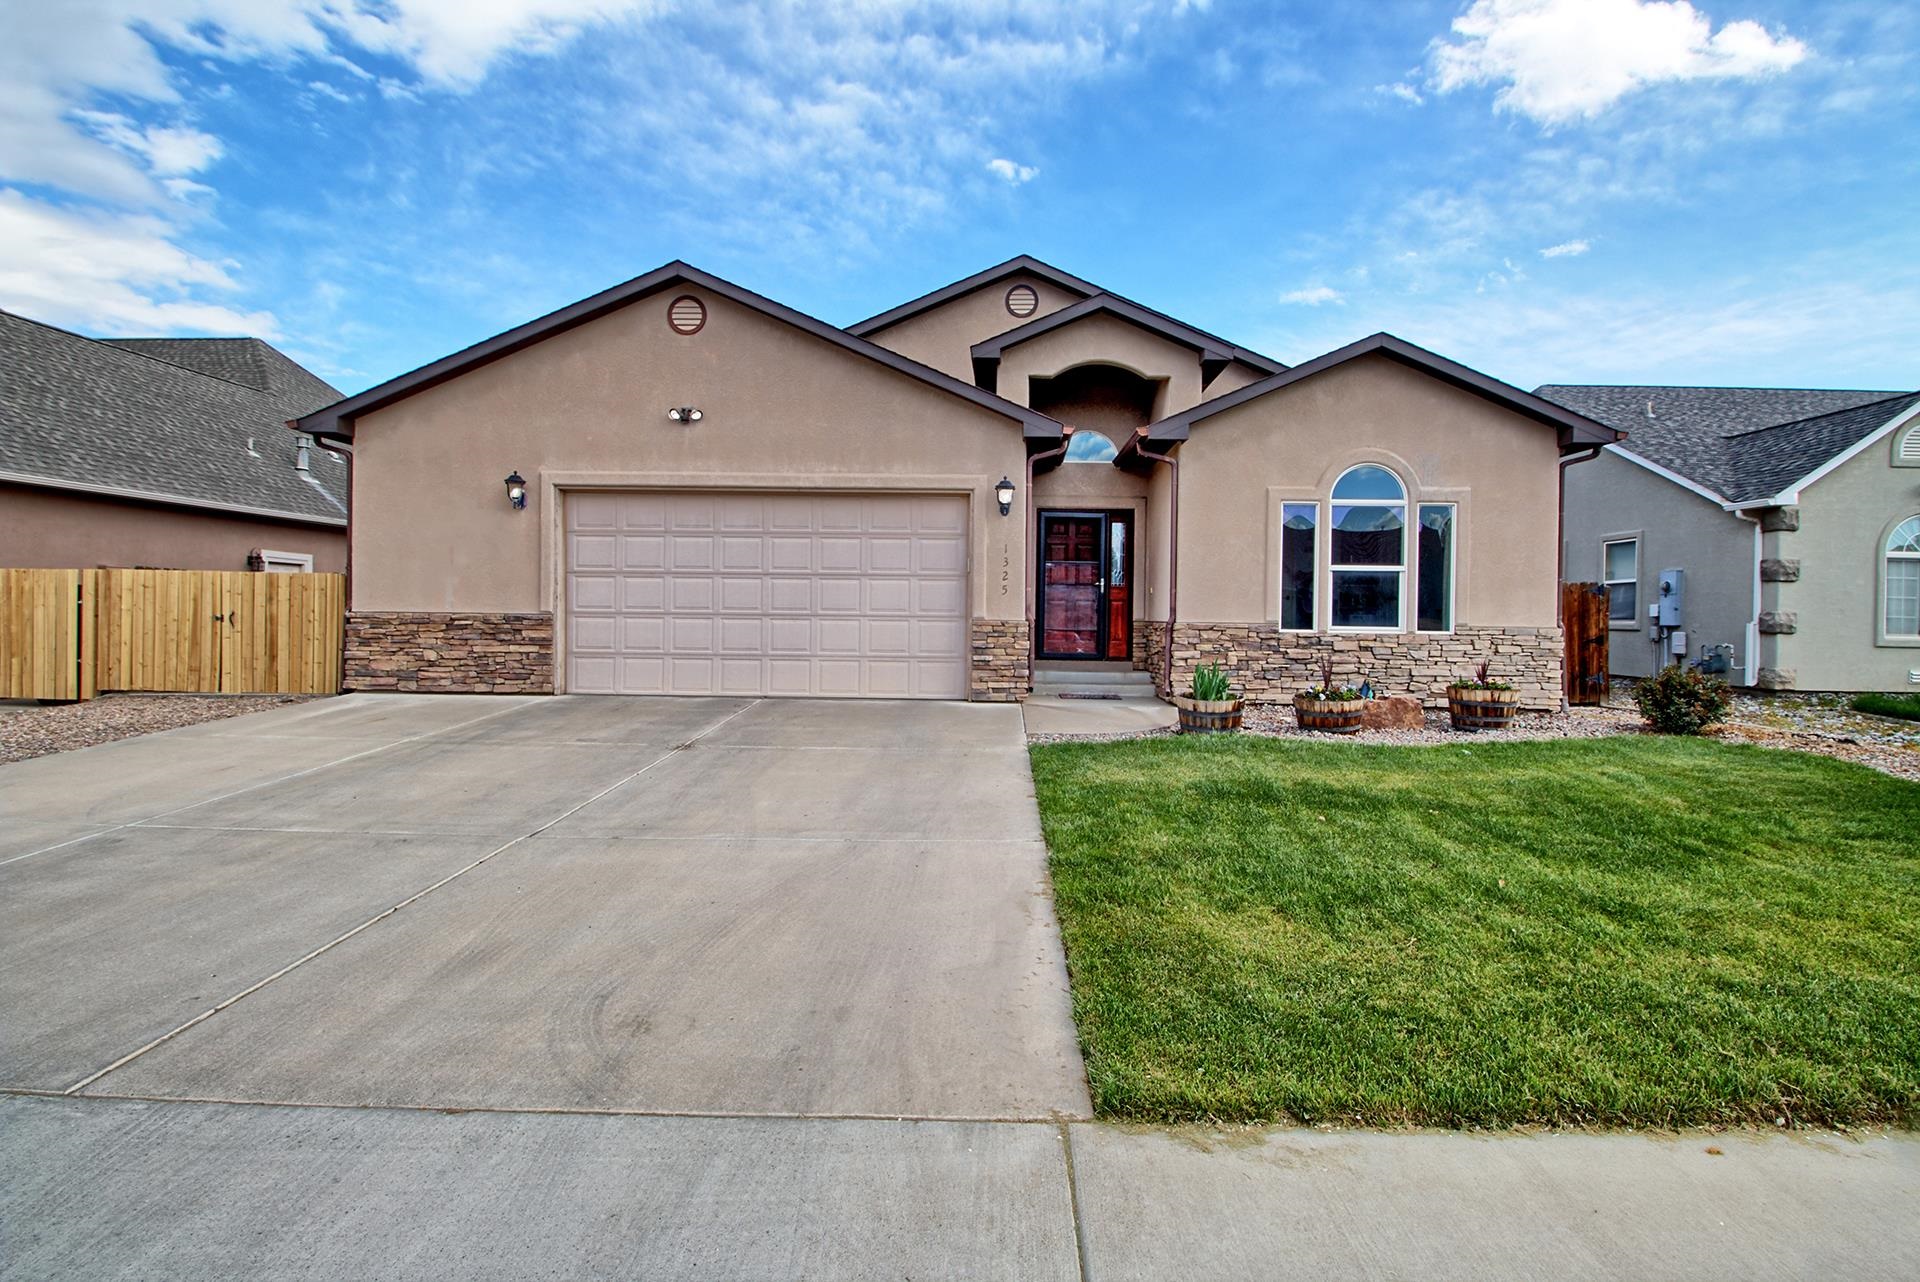 This beautiful ranch-style home features 4 bedrooms, 2 bathrooms, two living areas and an oversized 2-car garage. The home is situated in the desirable Vista Valley Subdivision and backs  to the 7-acre Vista Valley Park maintained by the City of Fruita. Highlights include new engineered hardwood flooring, newer carpet in bedrooms, gas fireplace, large garden tub in the master bathroom and RV parking/pad. Located just minutes from downtown Fruita and a short drive from popular biking and hiking trails.